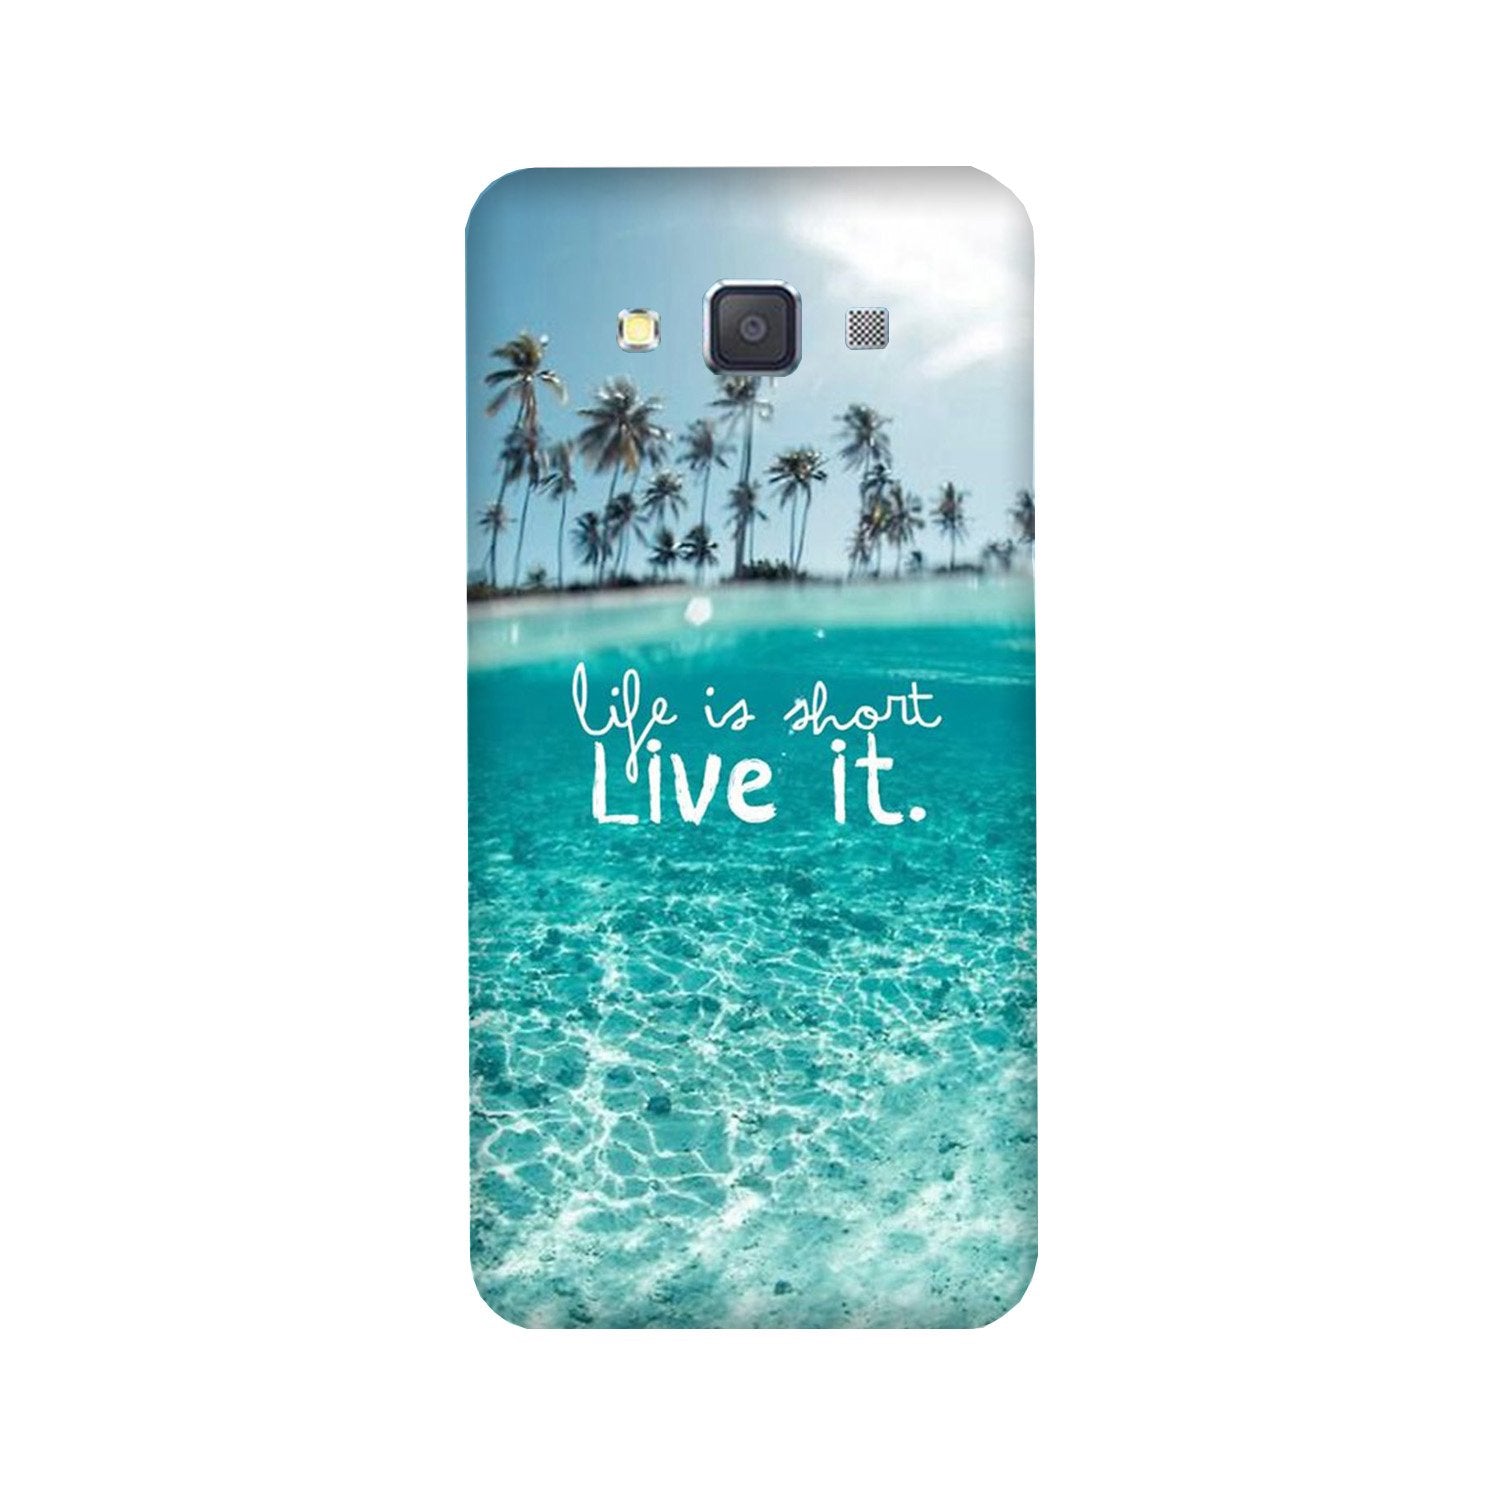 Life is short live it Case for Galaxy ON7/ON7 Pro